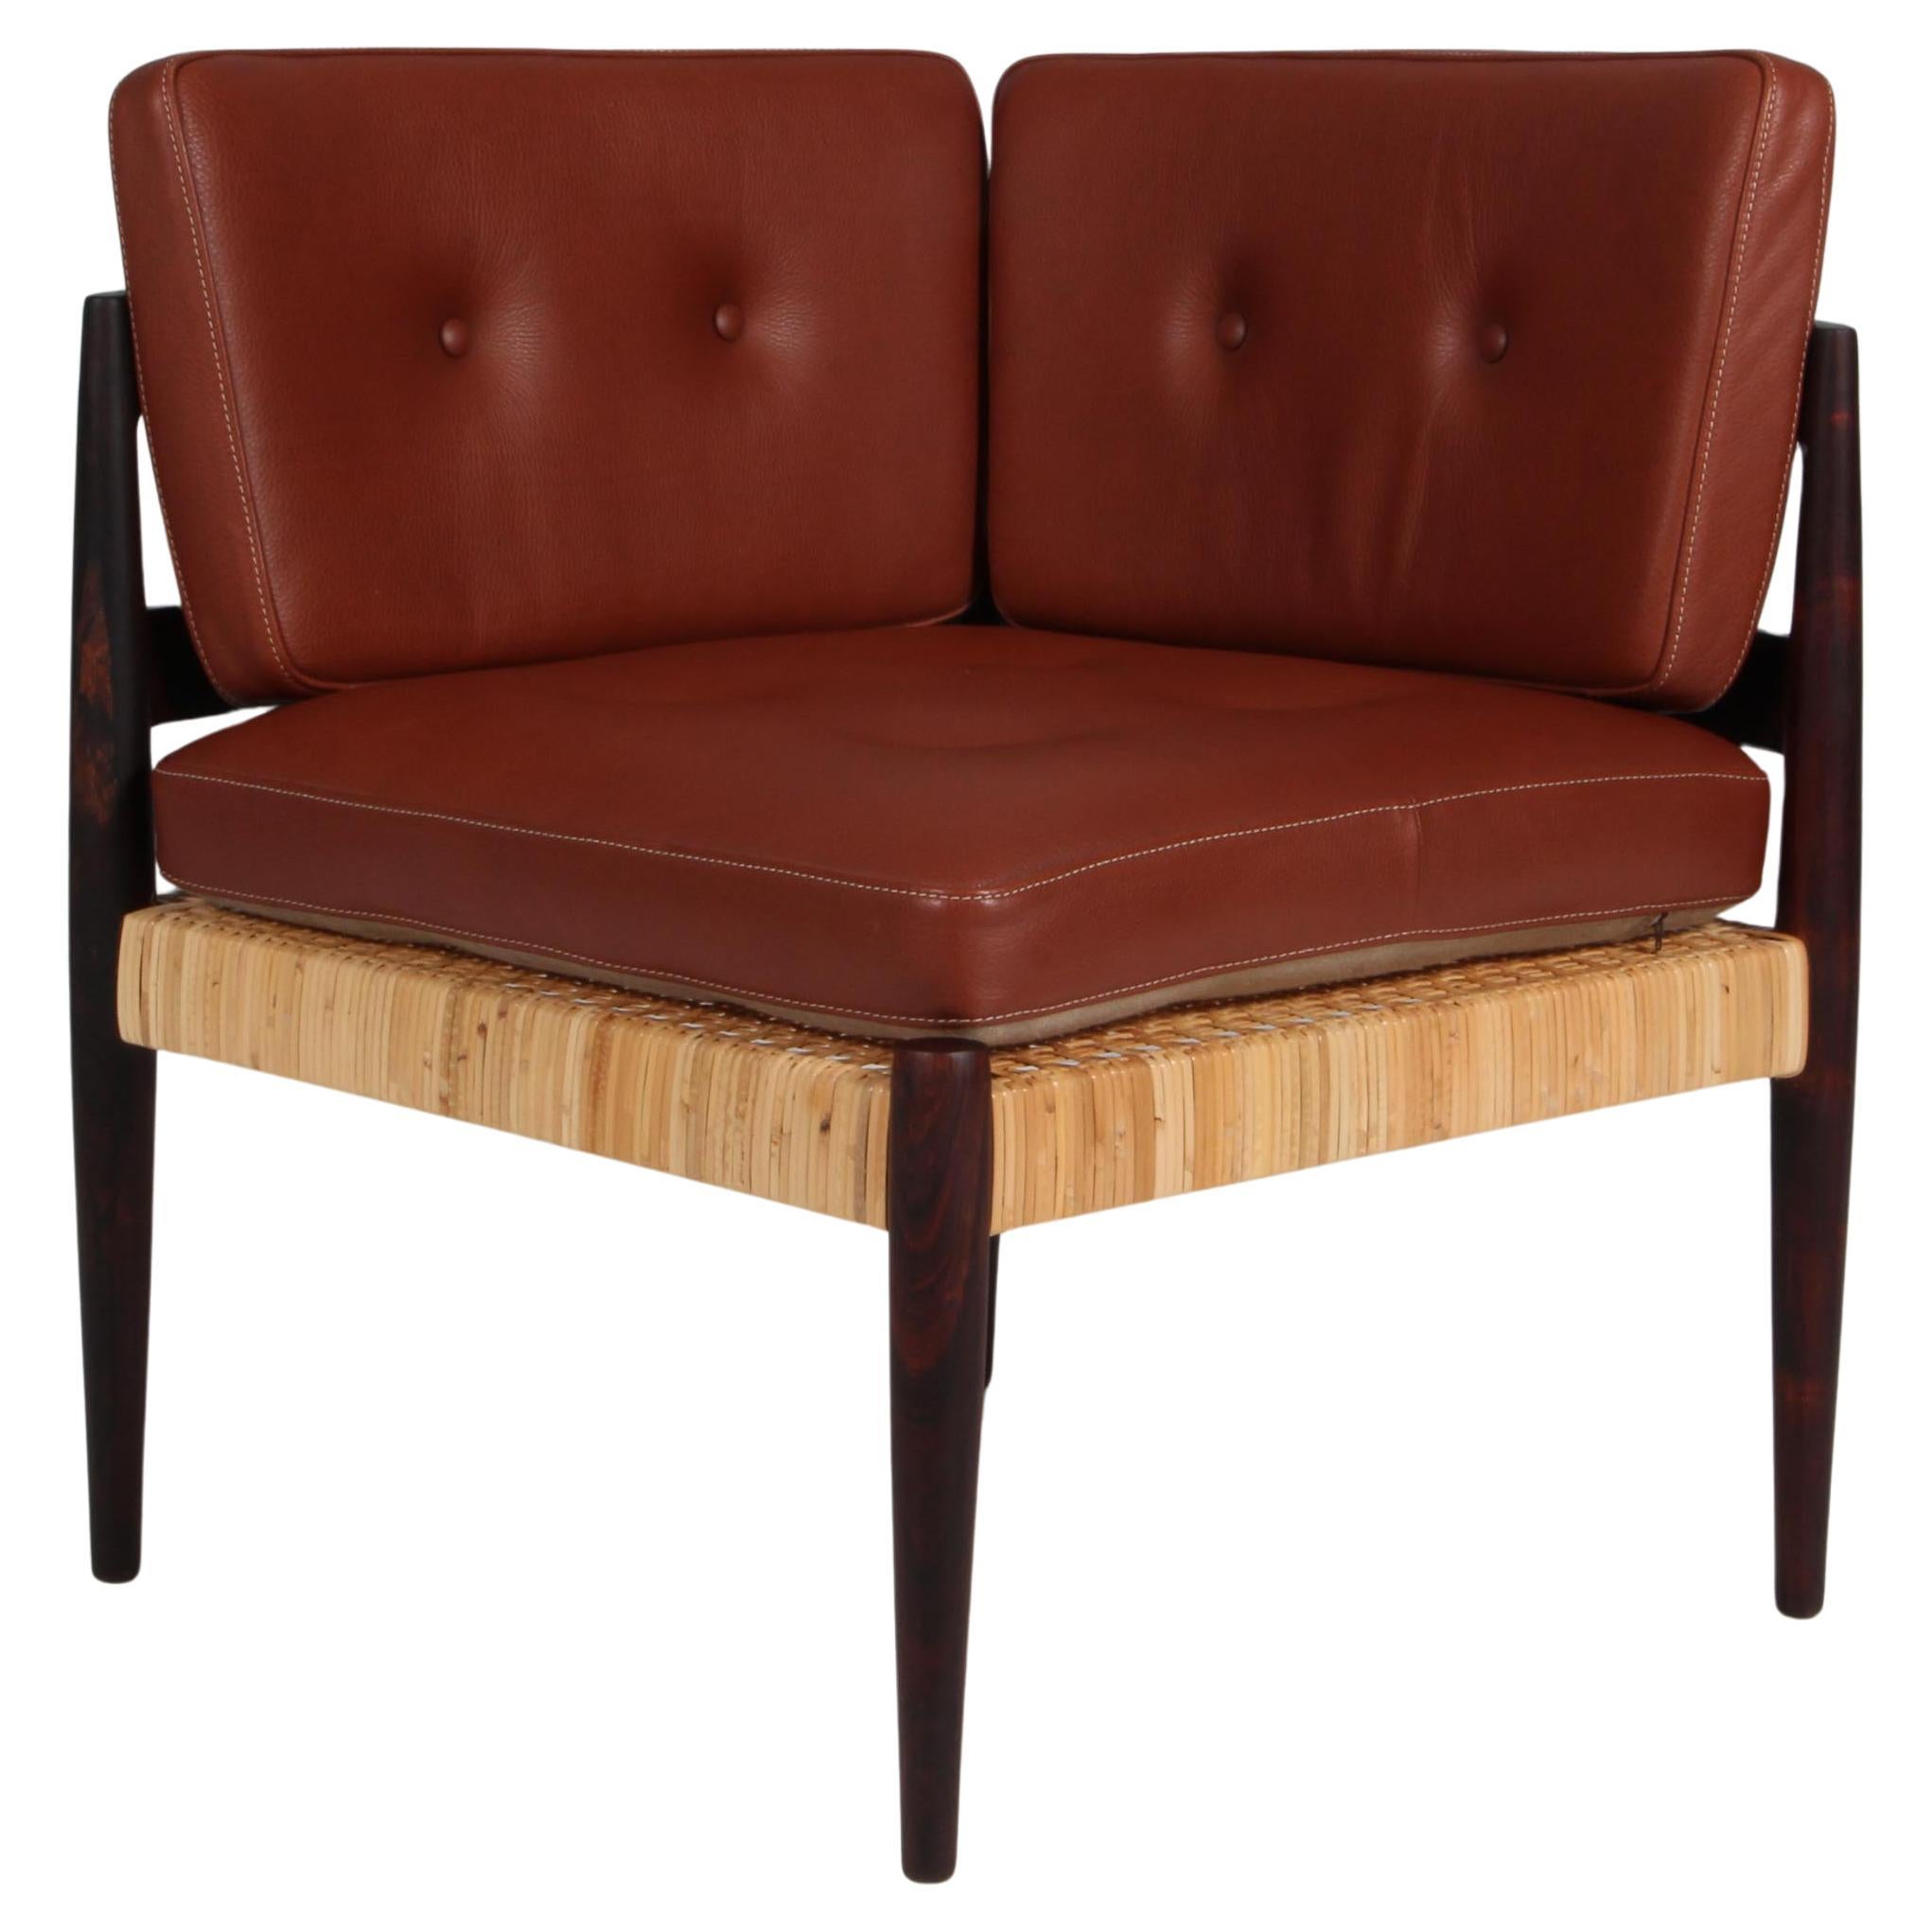 Kai Kristiansen Univers corner chair in leather, cane and rosewood For Sale